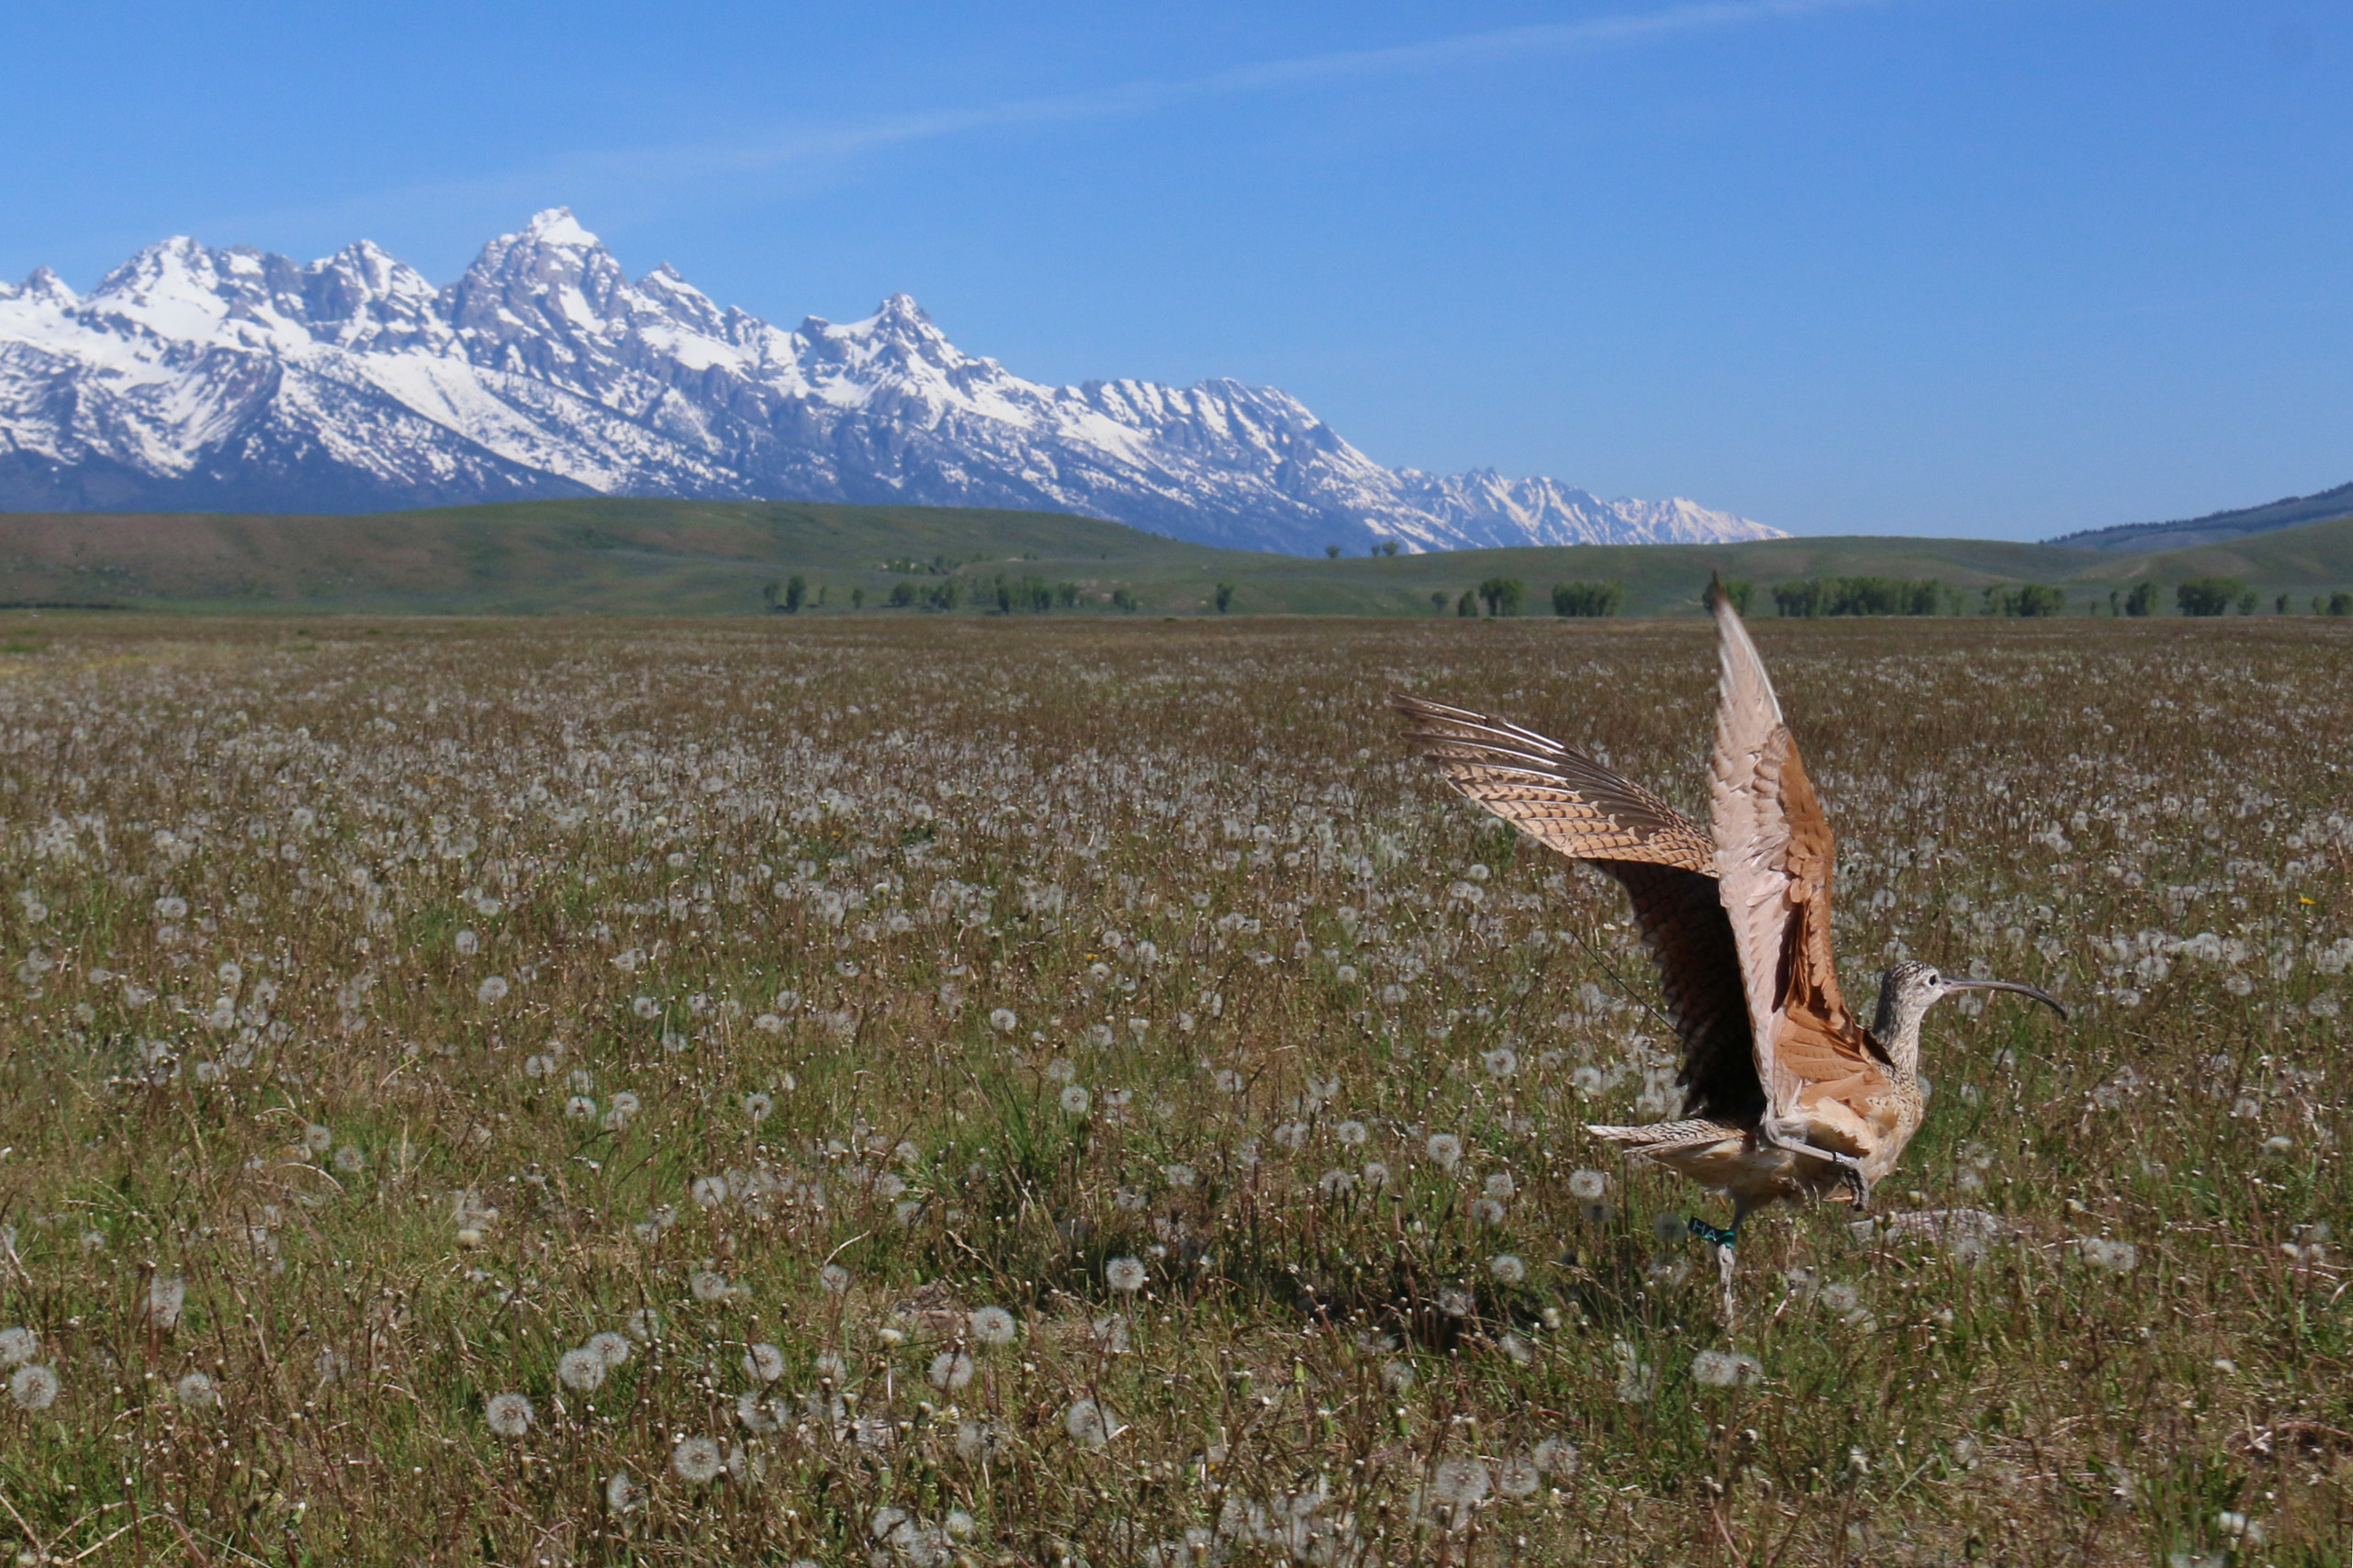 a long billed curlew takes flight with the snowy grand teton mountains in the background